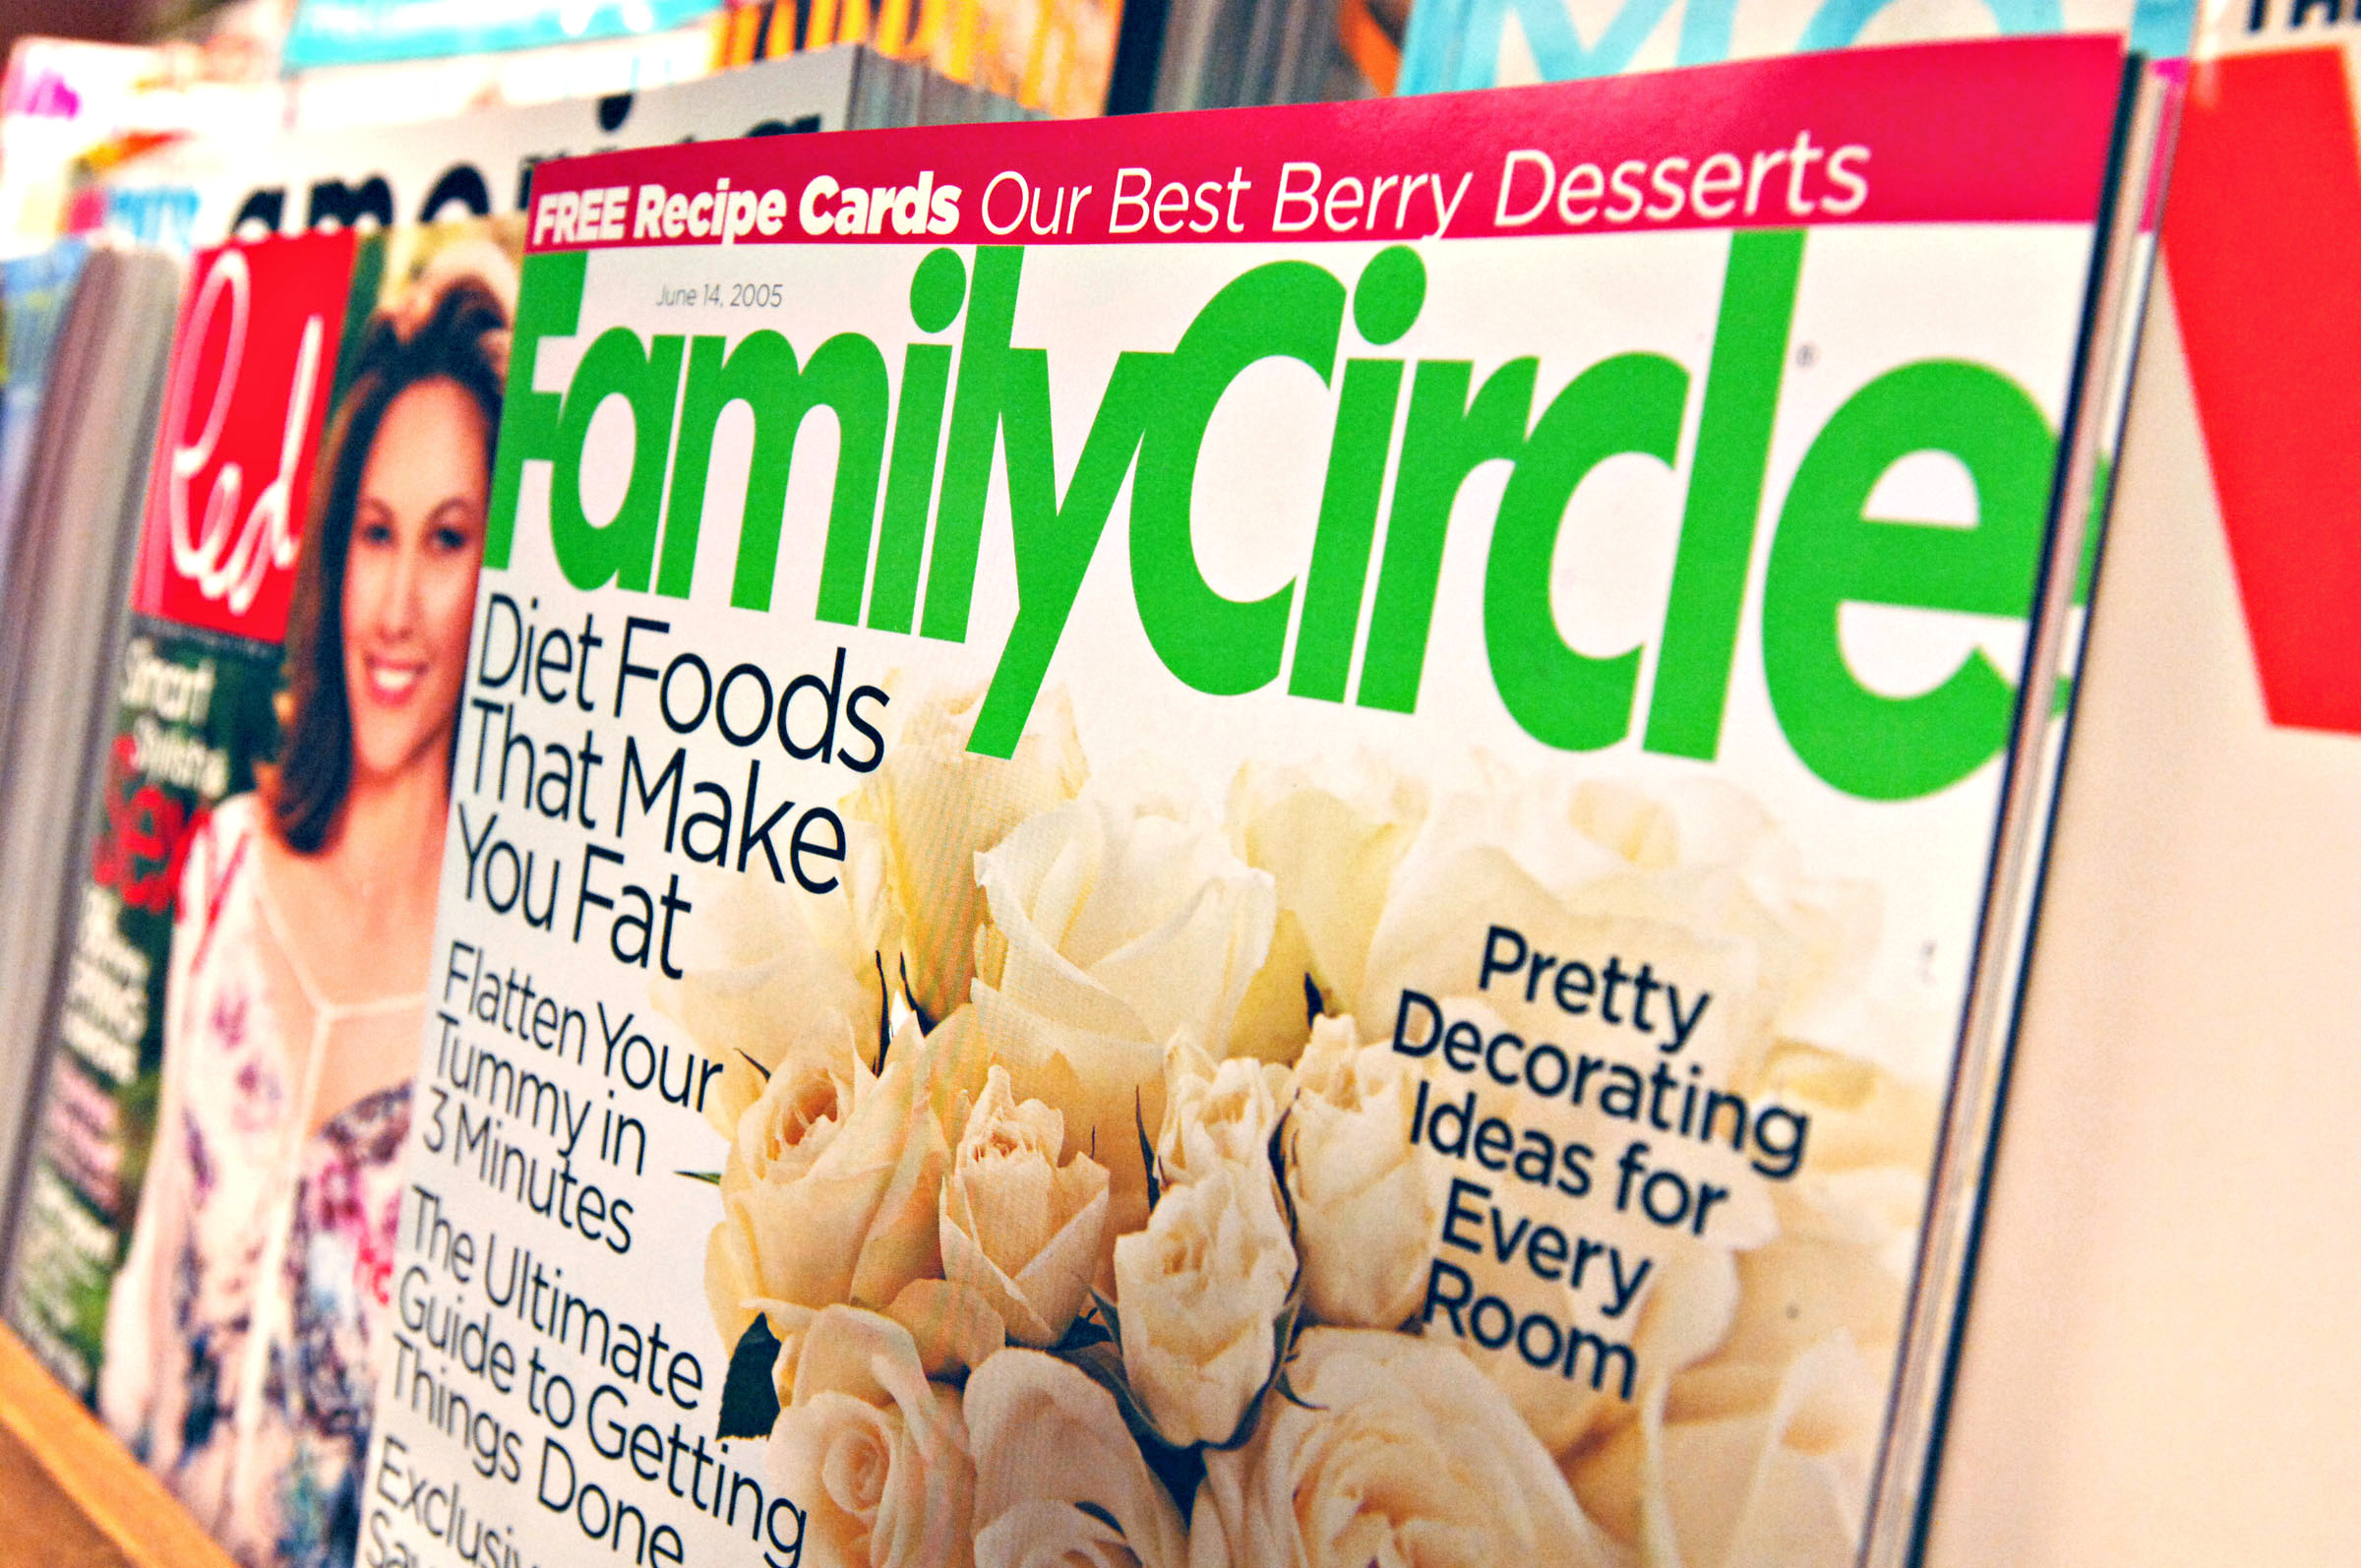 PHOTO: A copy of Family Circle magazine is displayed for a photograph in a Borders bookstore in New York, May 24, 2005.